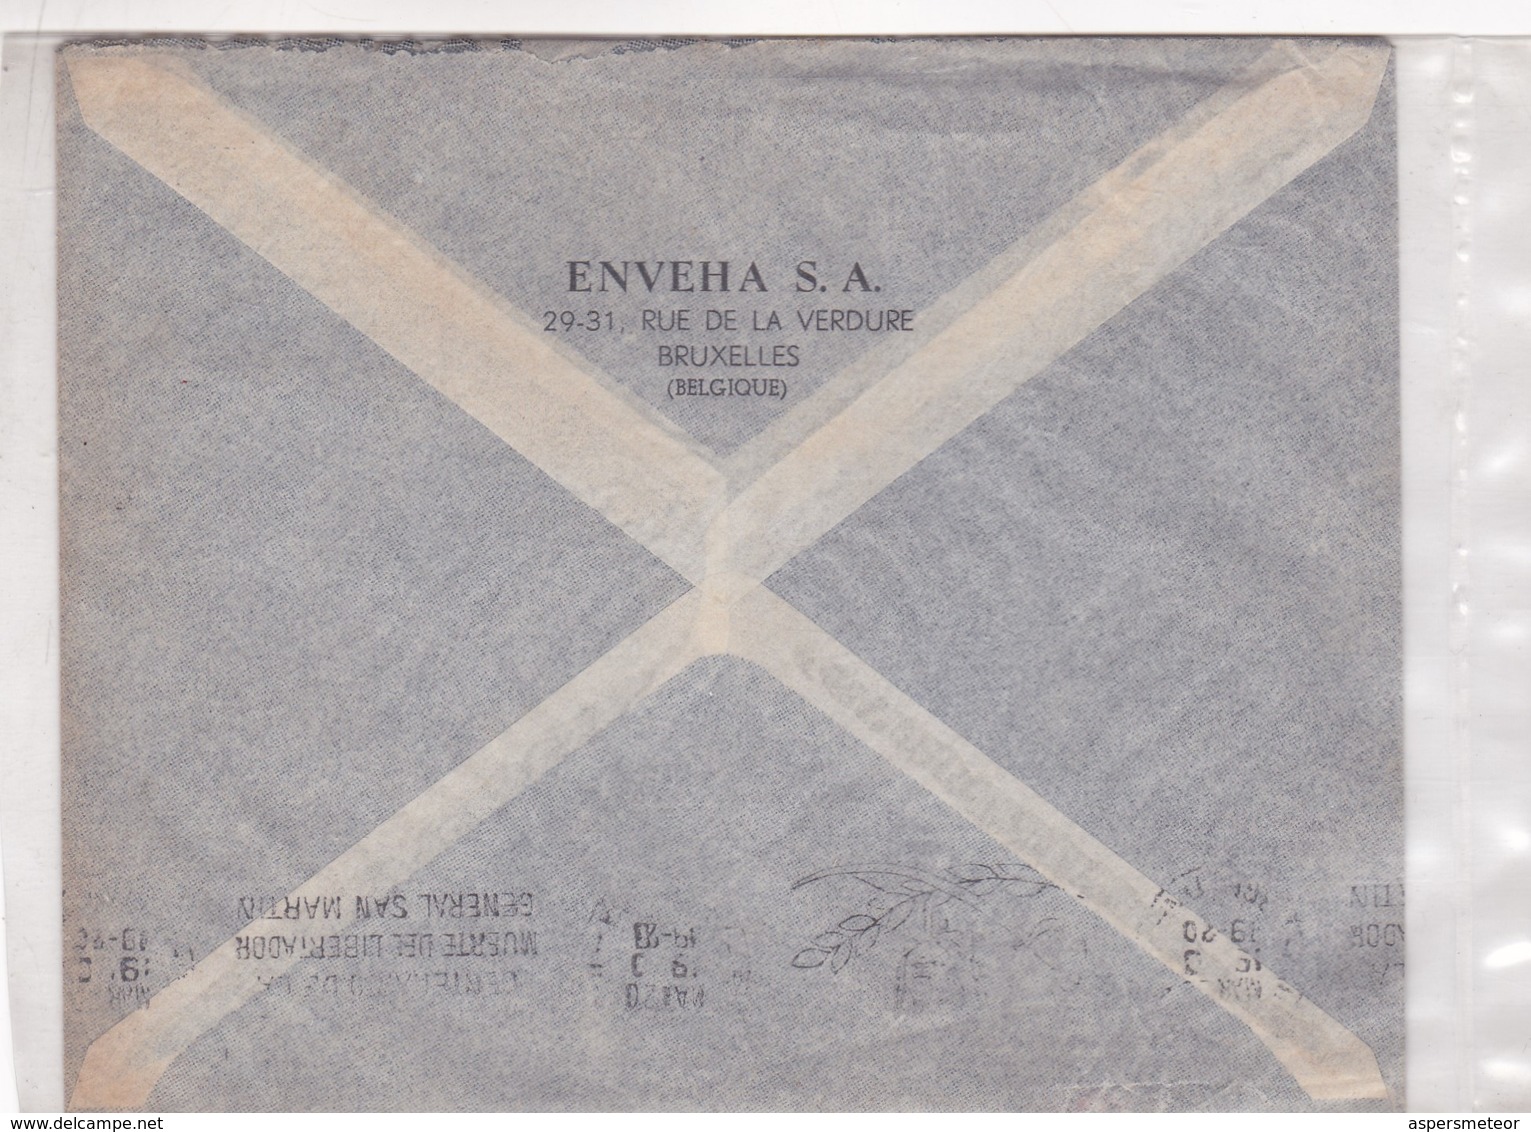 BELGIQUE - CIRCULATED ENVELOPE FROM BRUXELLES TO BUENOS AIRES, ARGENTINA IN 1950 BY AIR MAIL -LILHU - Briefe U. Dokumente